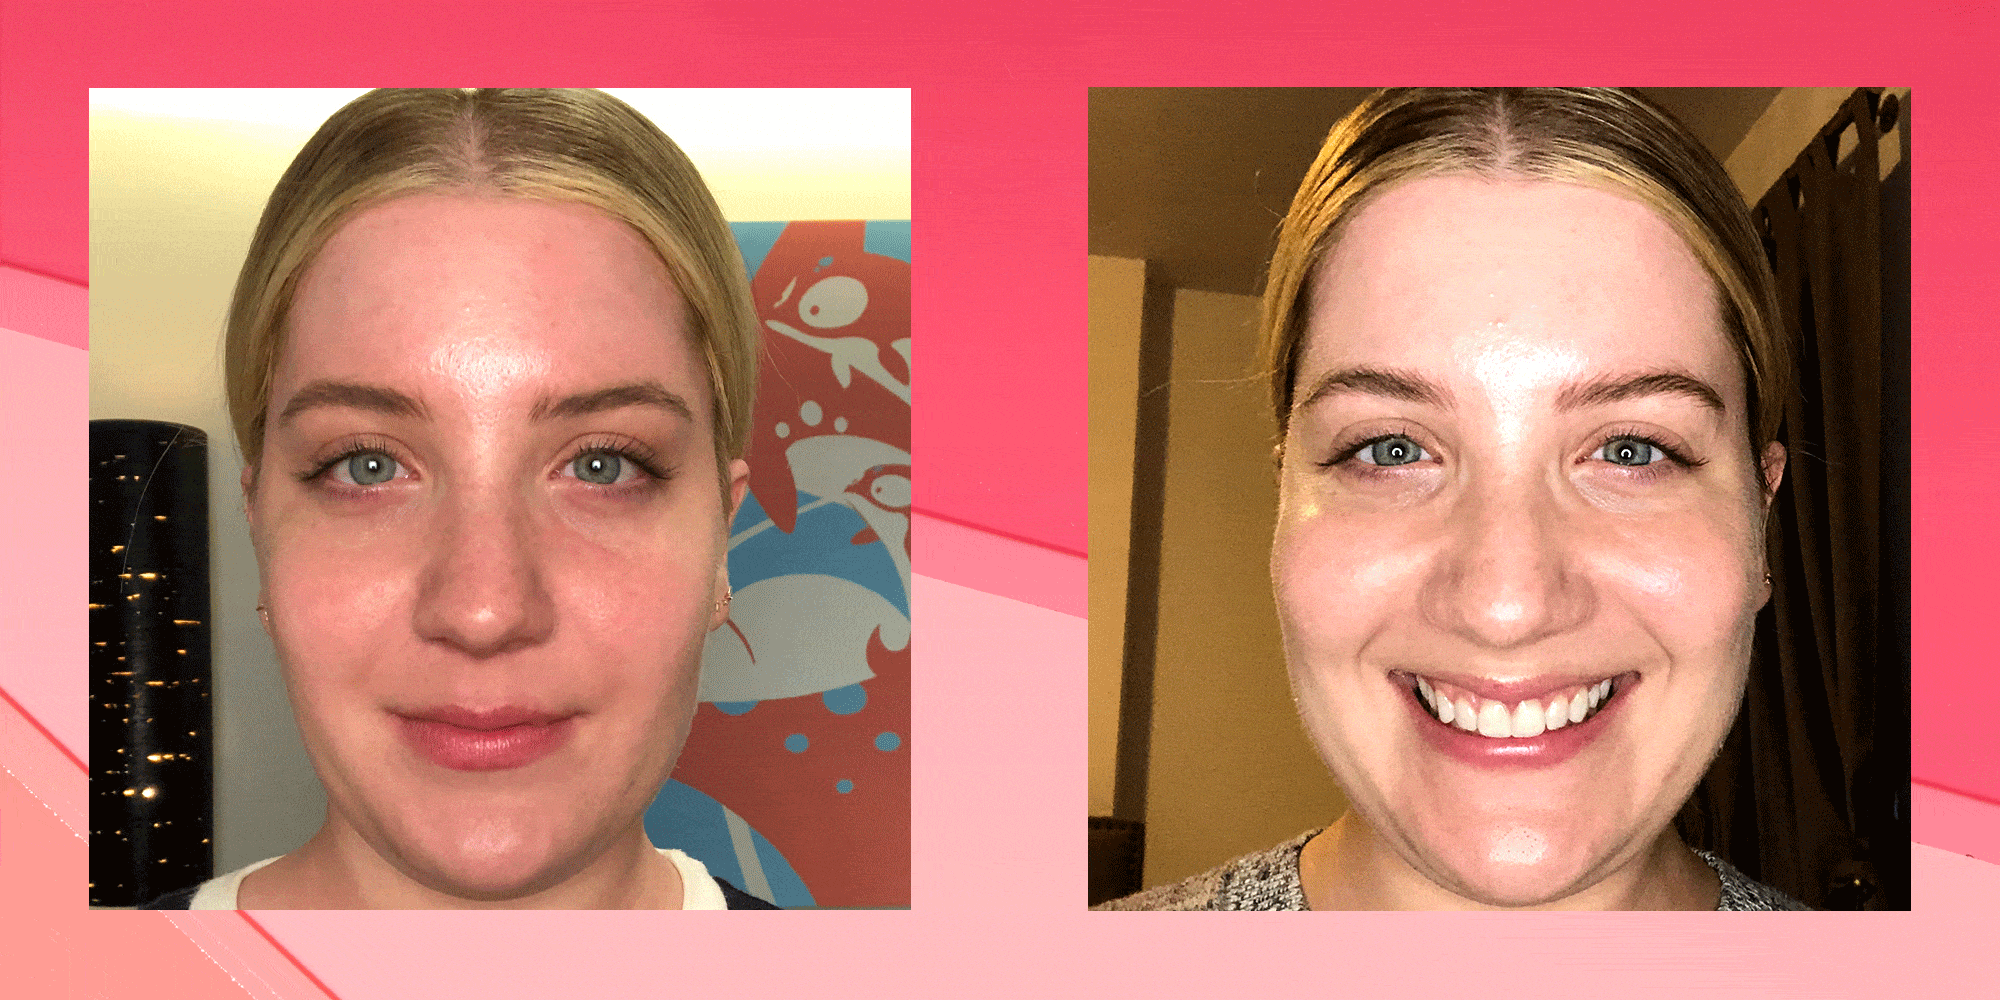 IPL Laser for Rosacea - Here's What Happened When I Tried It